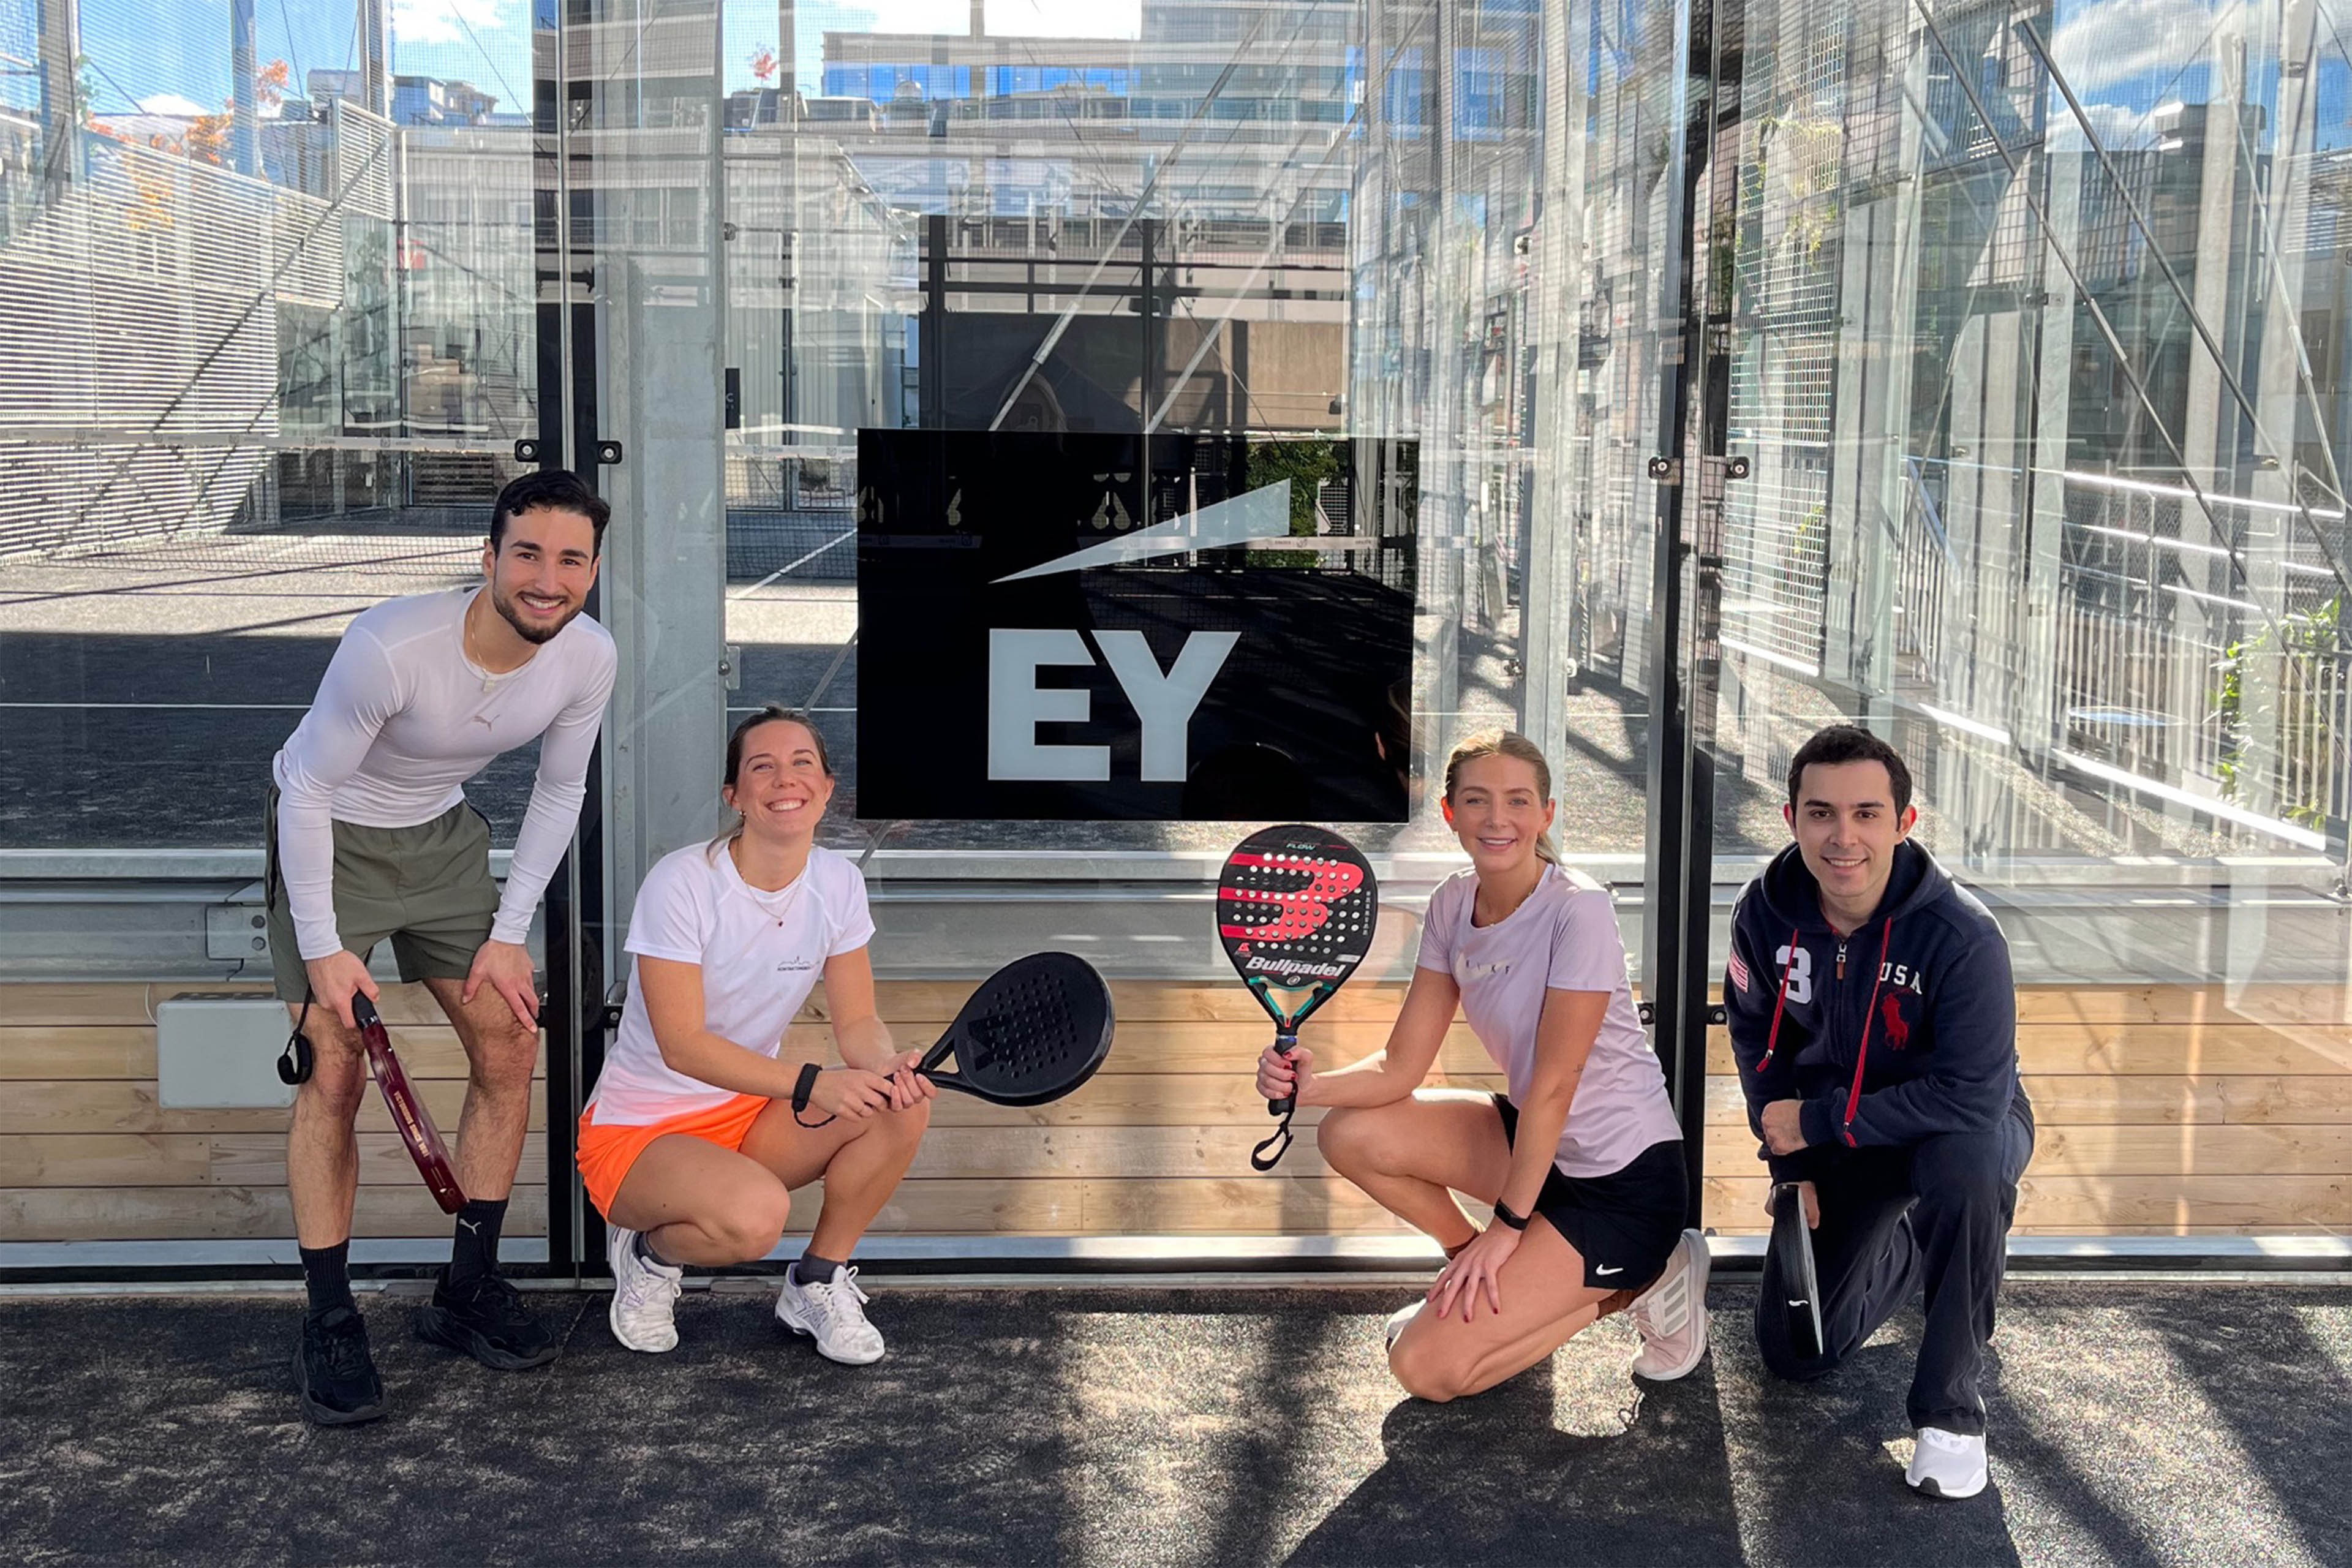 EY business people playing padel during the lunch breaks